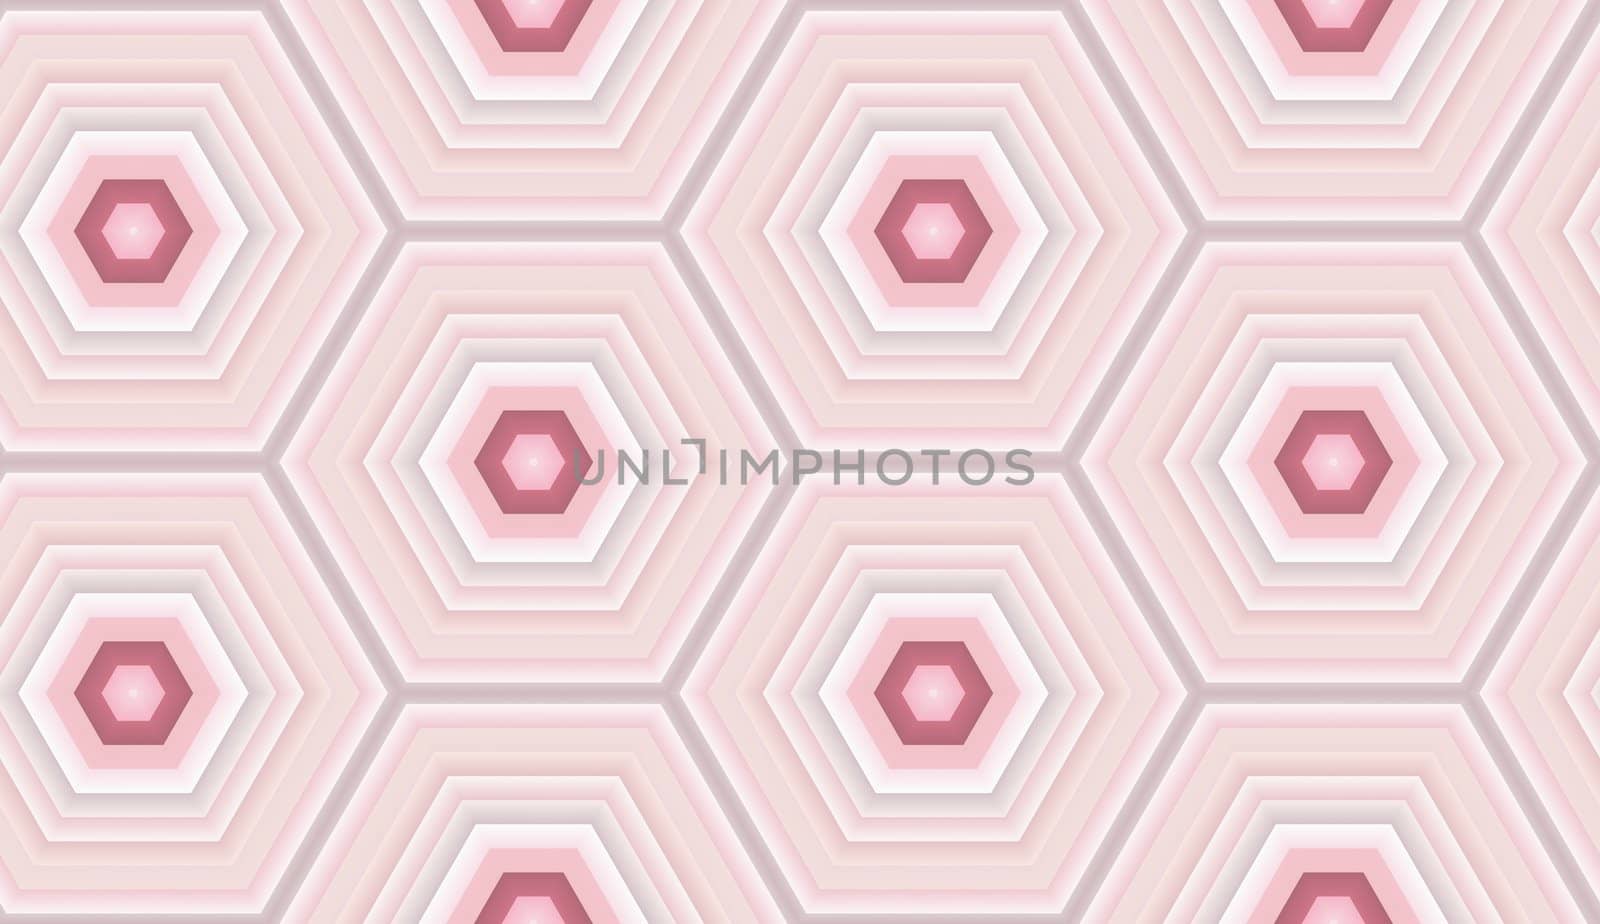 Illustrated pink seamless background made of pink hexagons